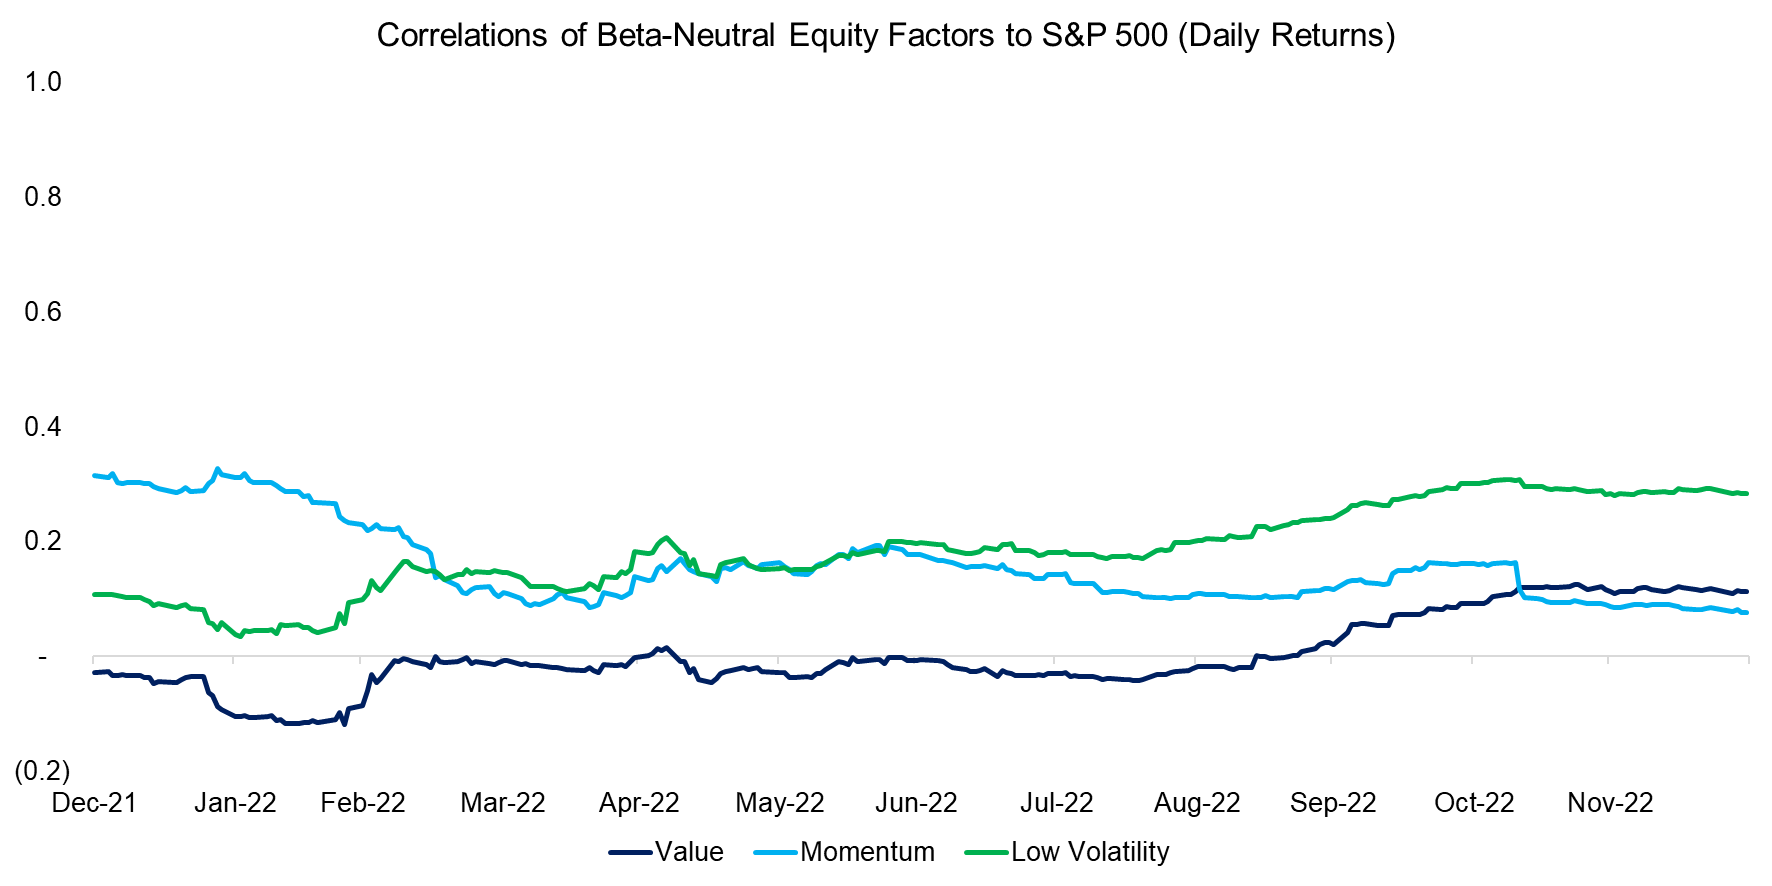 Correlations of Beta-Neutral Equity Factors to S&P 500 (Daily Returns)